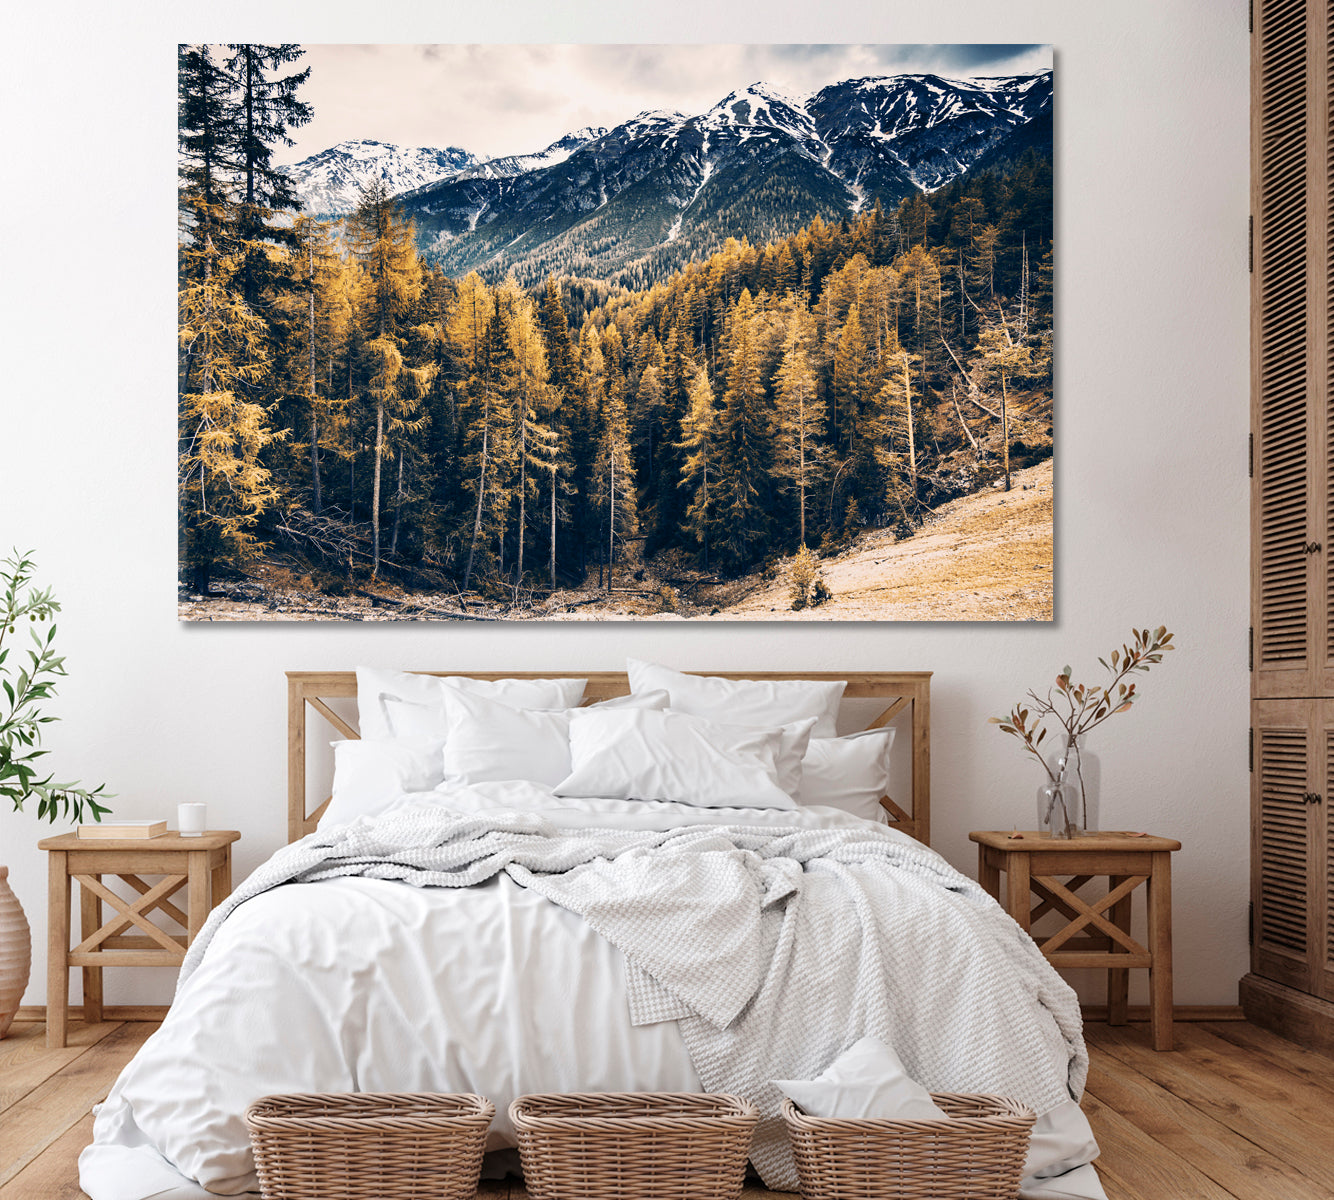 Mountain Forest in Autumn Canvas Print ArtLexy 1 Panel 24"x16" inches 